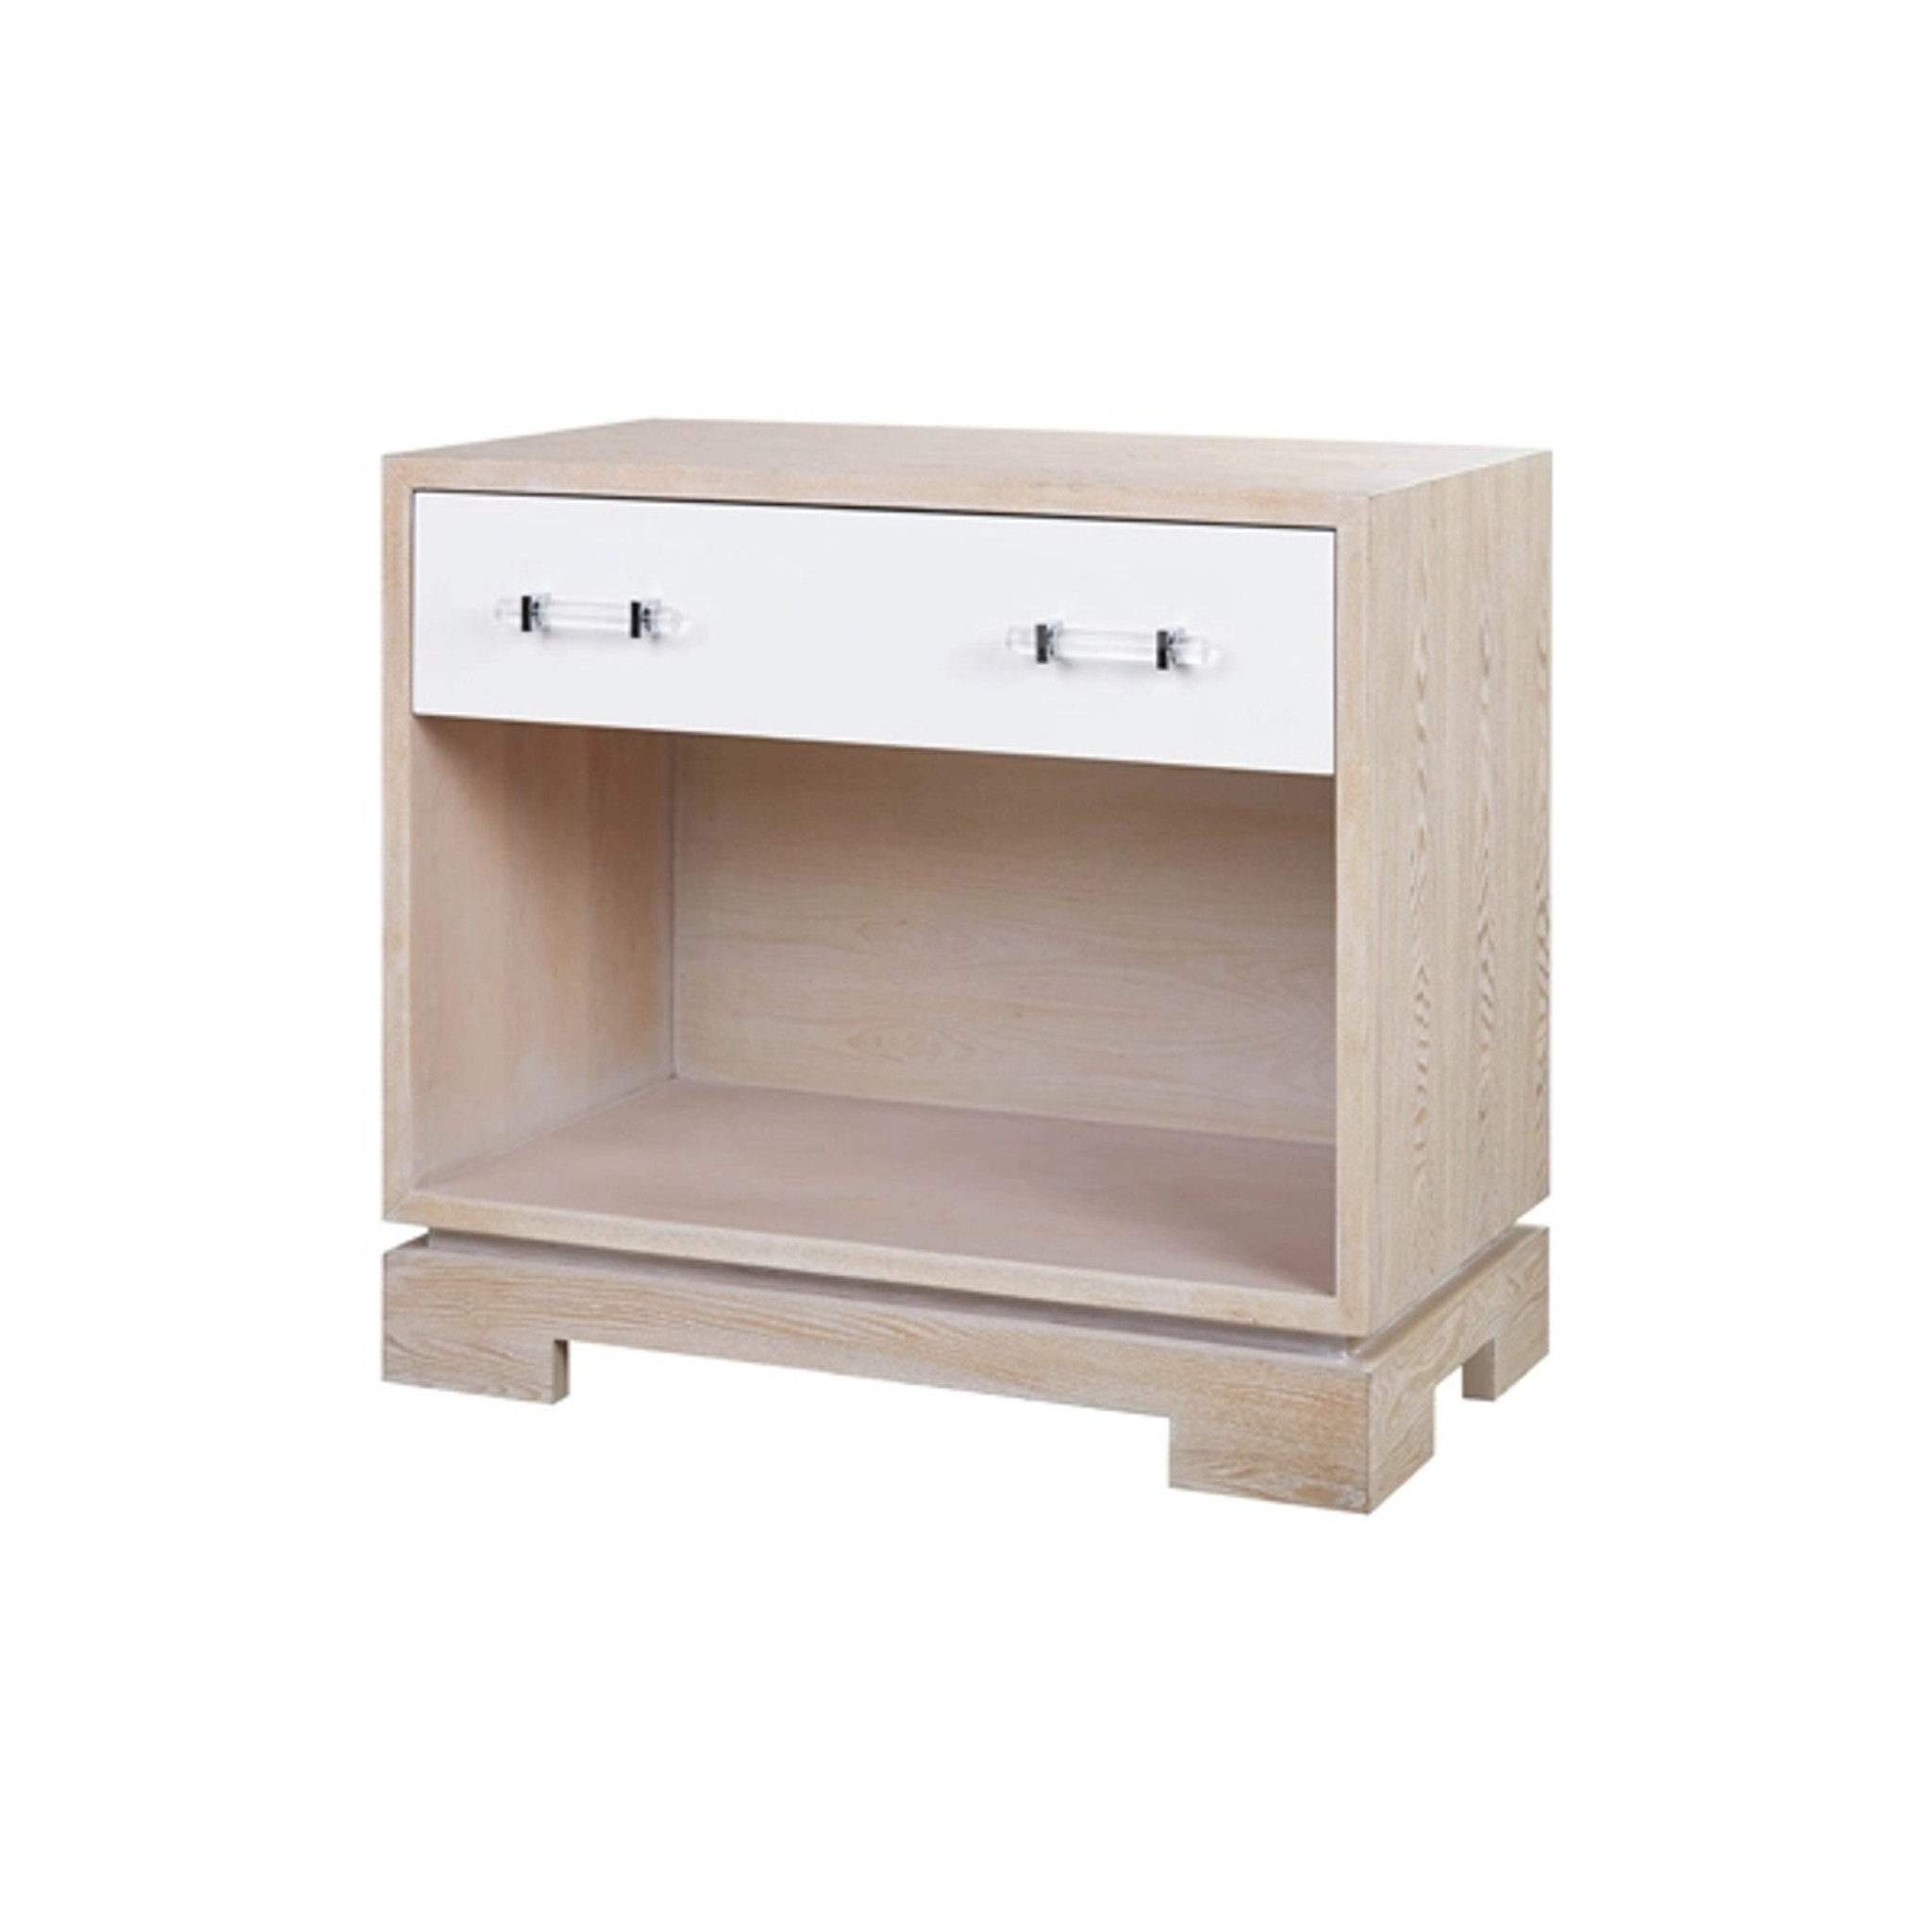 1 White Drawer & Oak Wood Nightstand with Lucite Handle